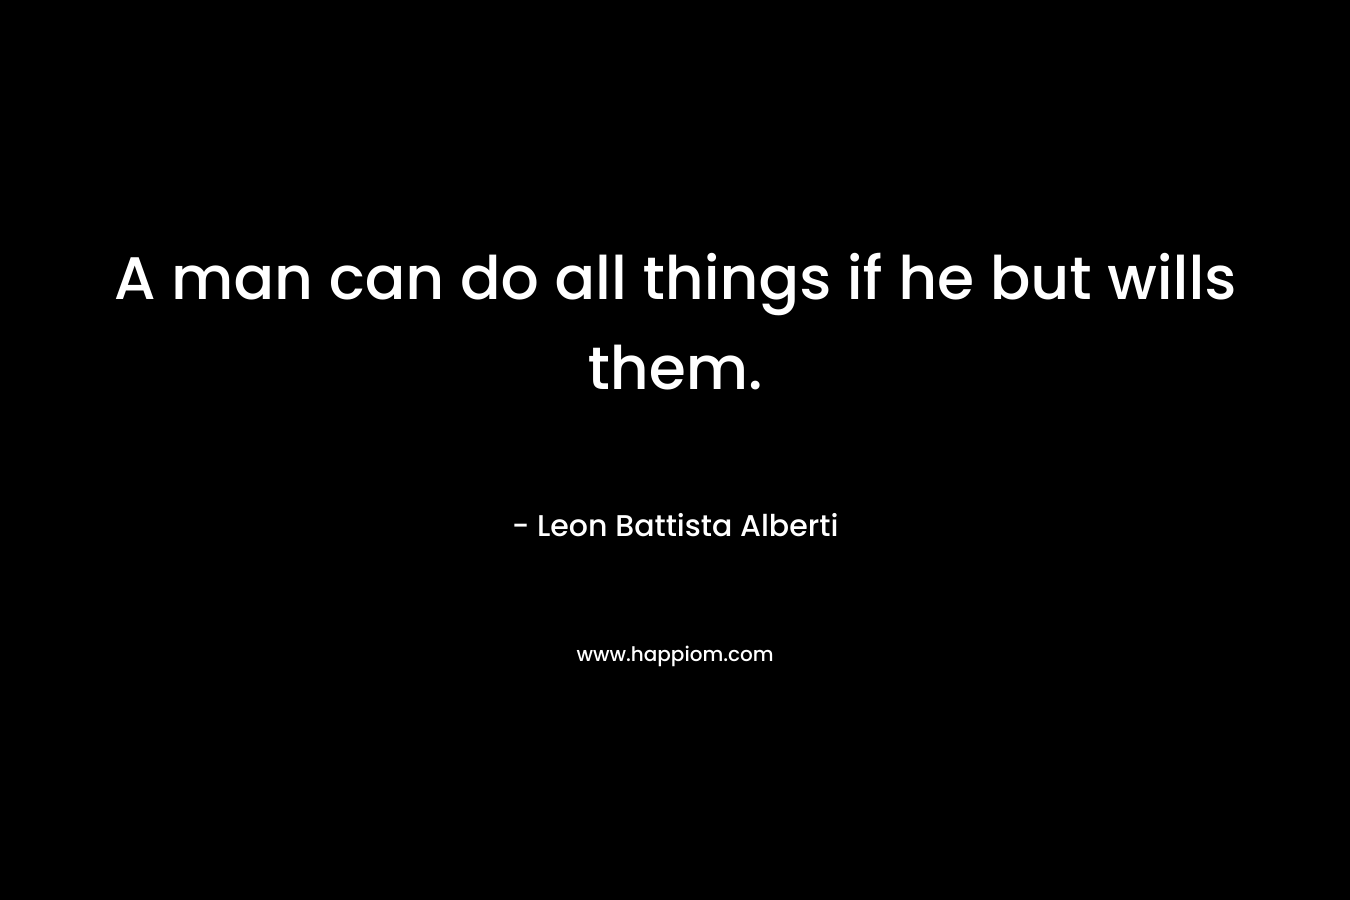 A man can do all things if he but wills them. – Leon Battista Alberti